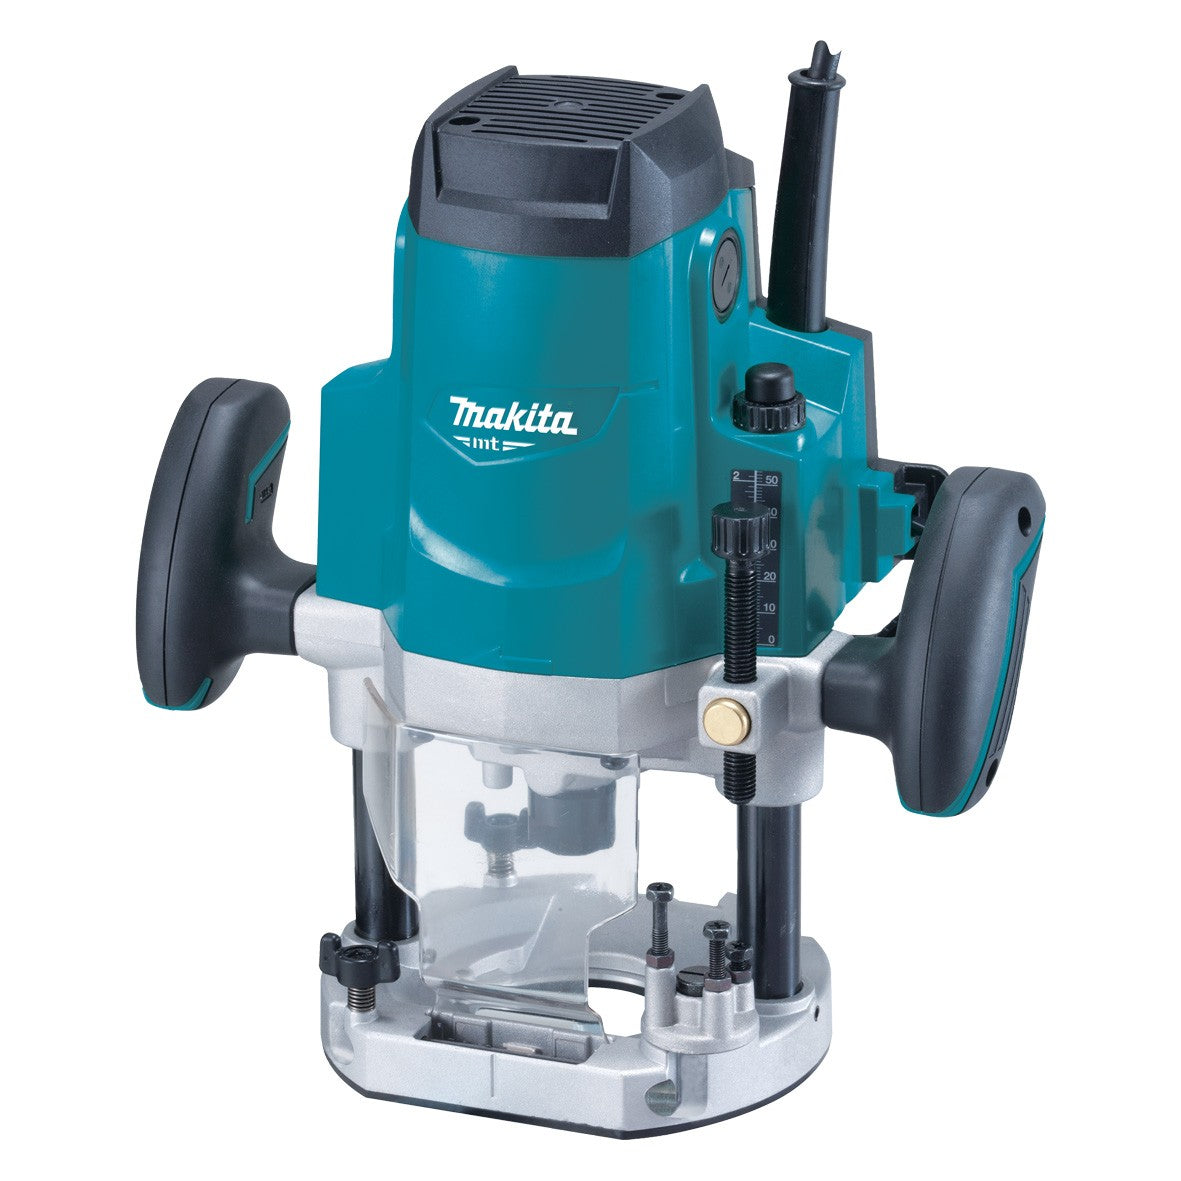 MT Series 12.7mm (1/2") Plunge Router M3600B by Makita